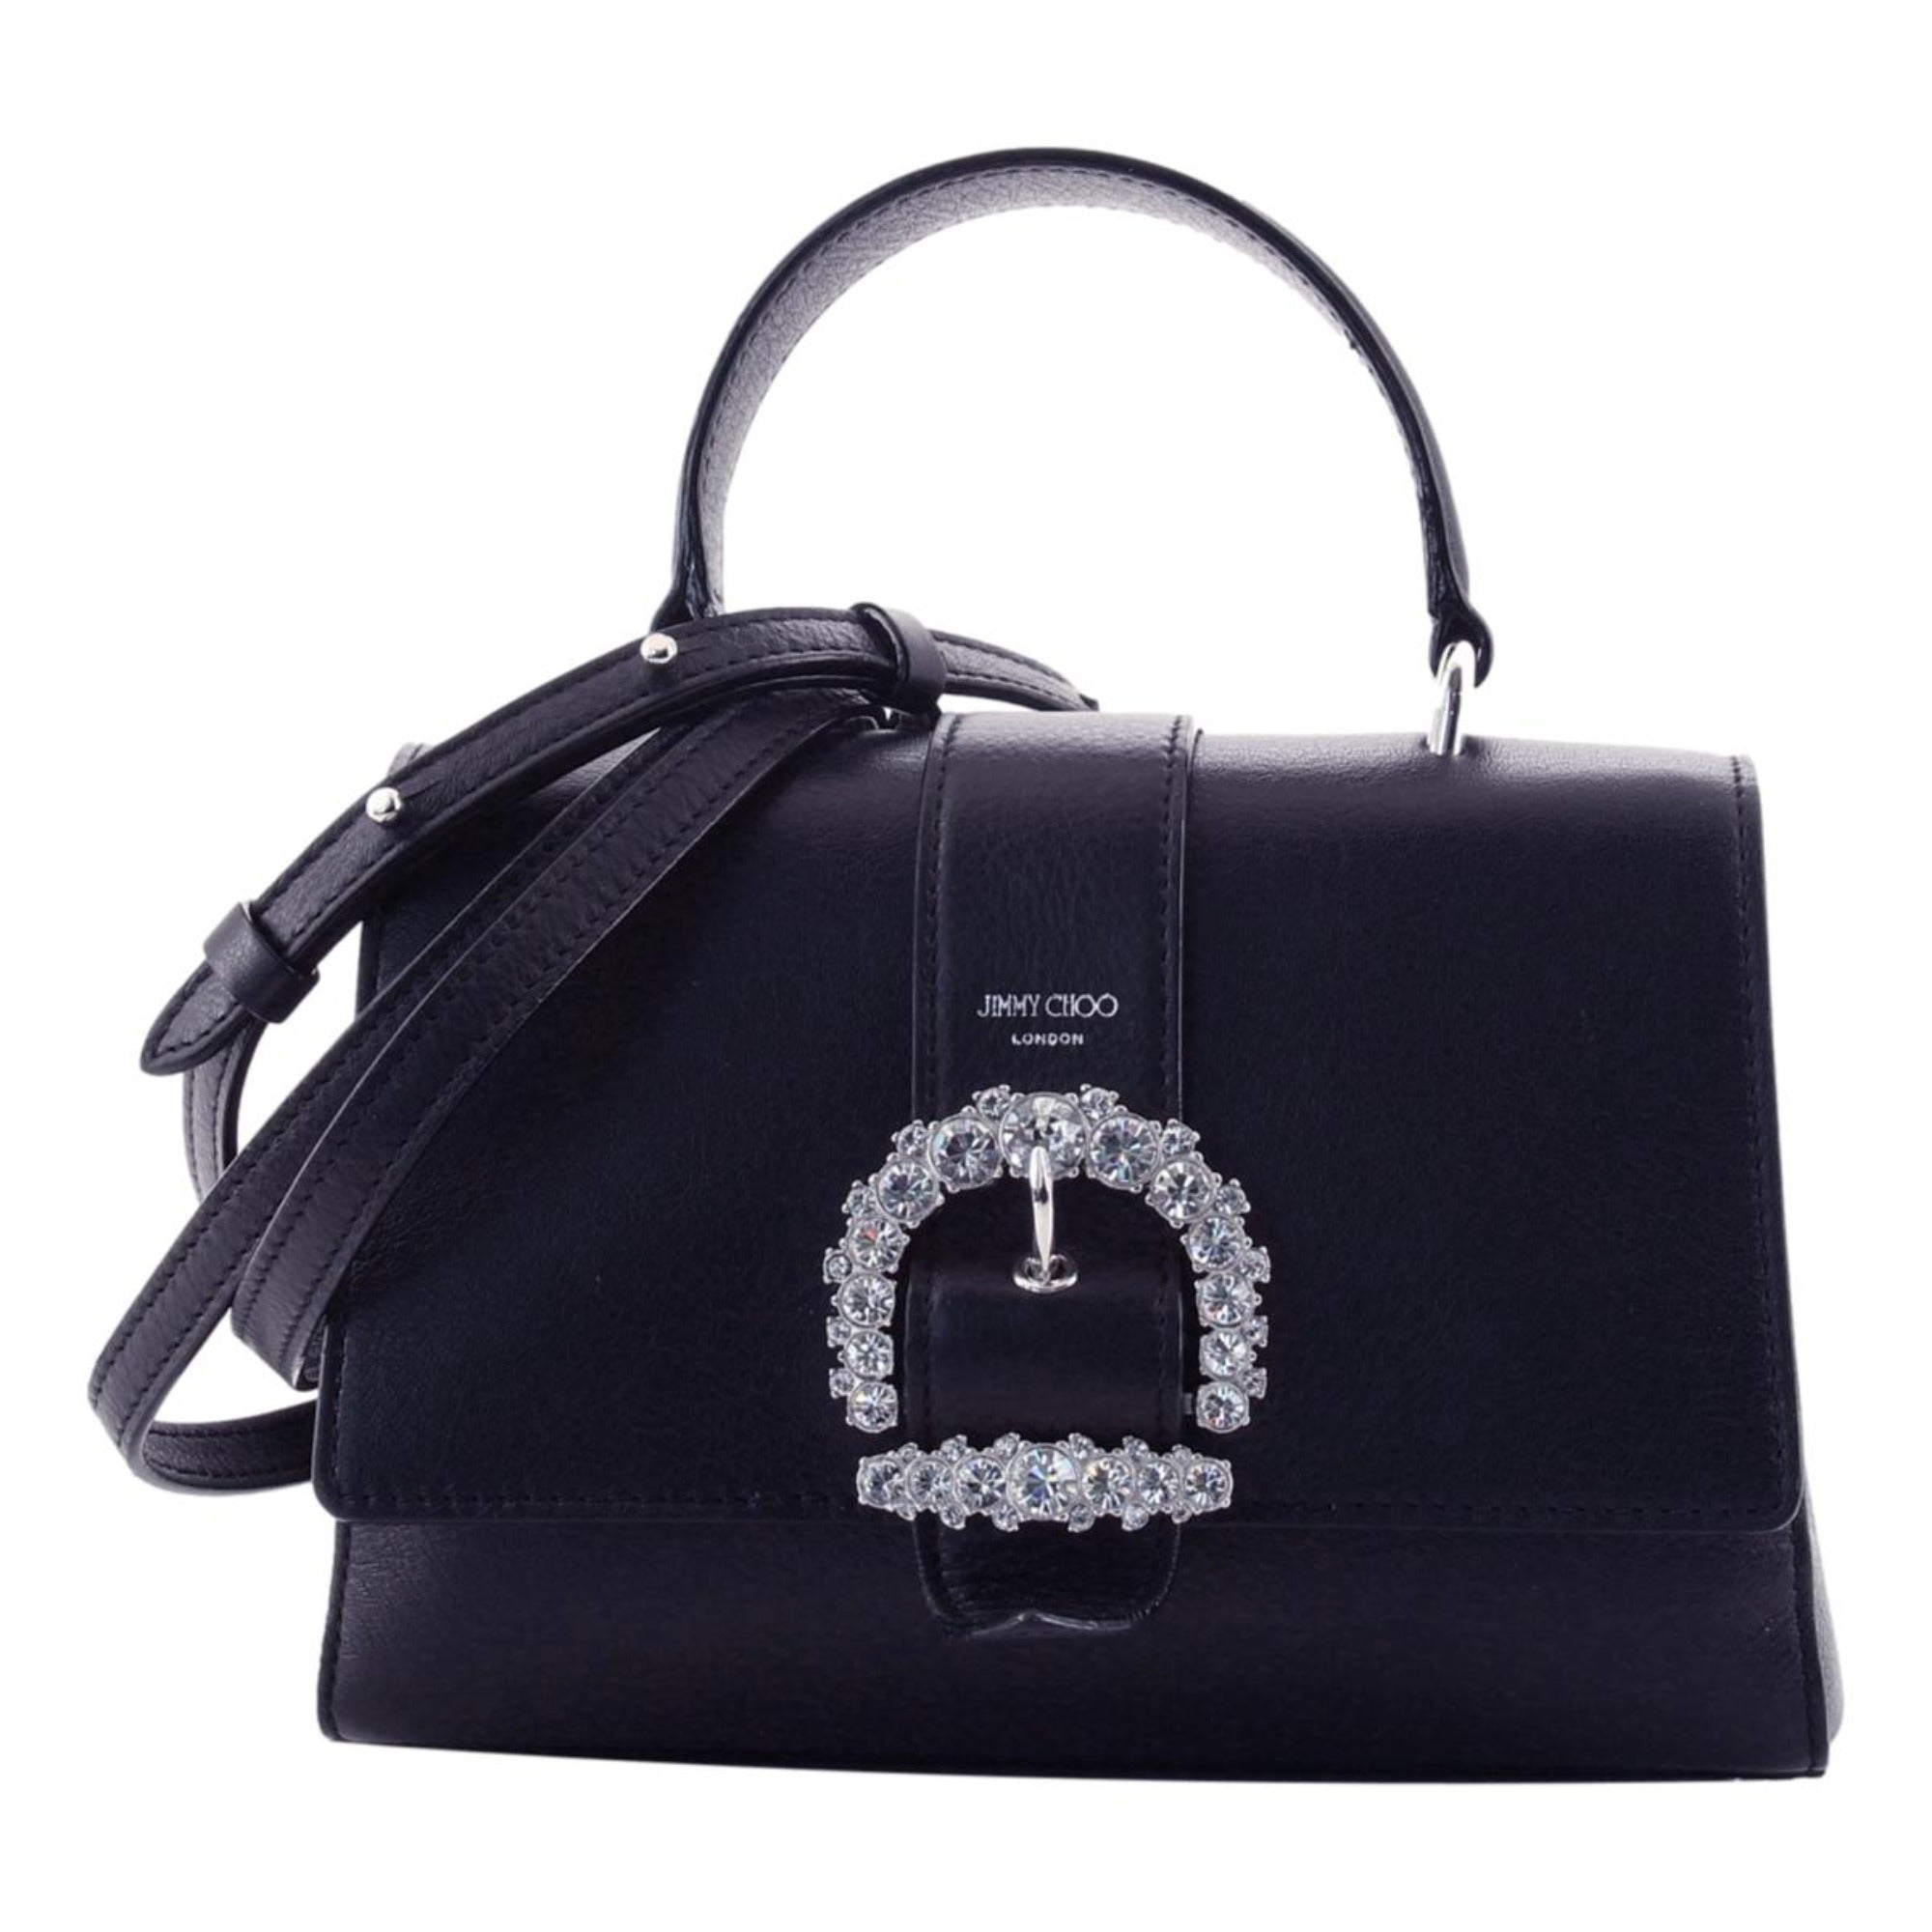 Jimmy Choo Cheri Dark Blue Leather Top Handle Bag OSQM | 028 at_Queen_Bee_of_Beverly_Hills